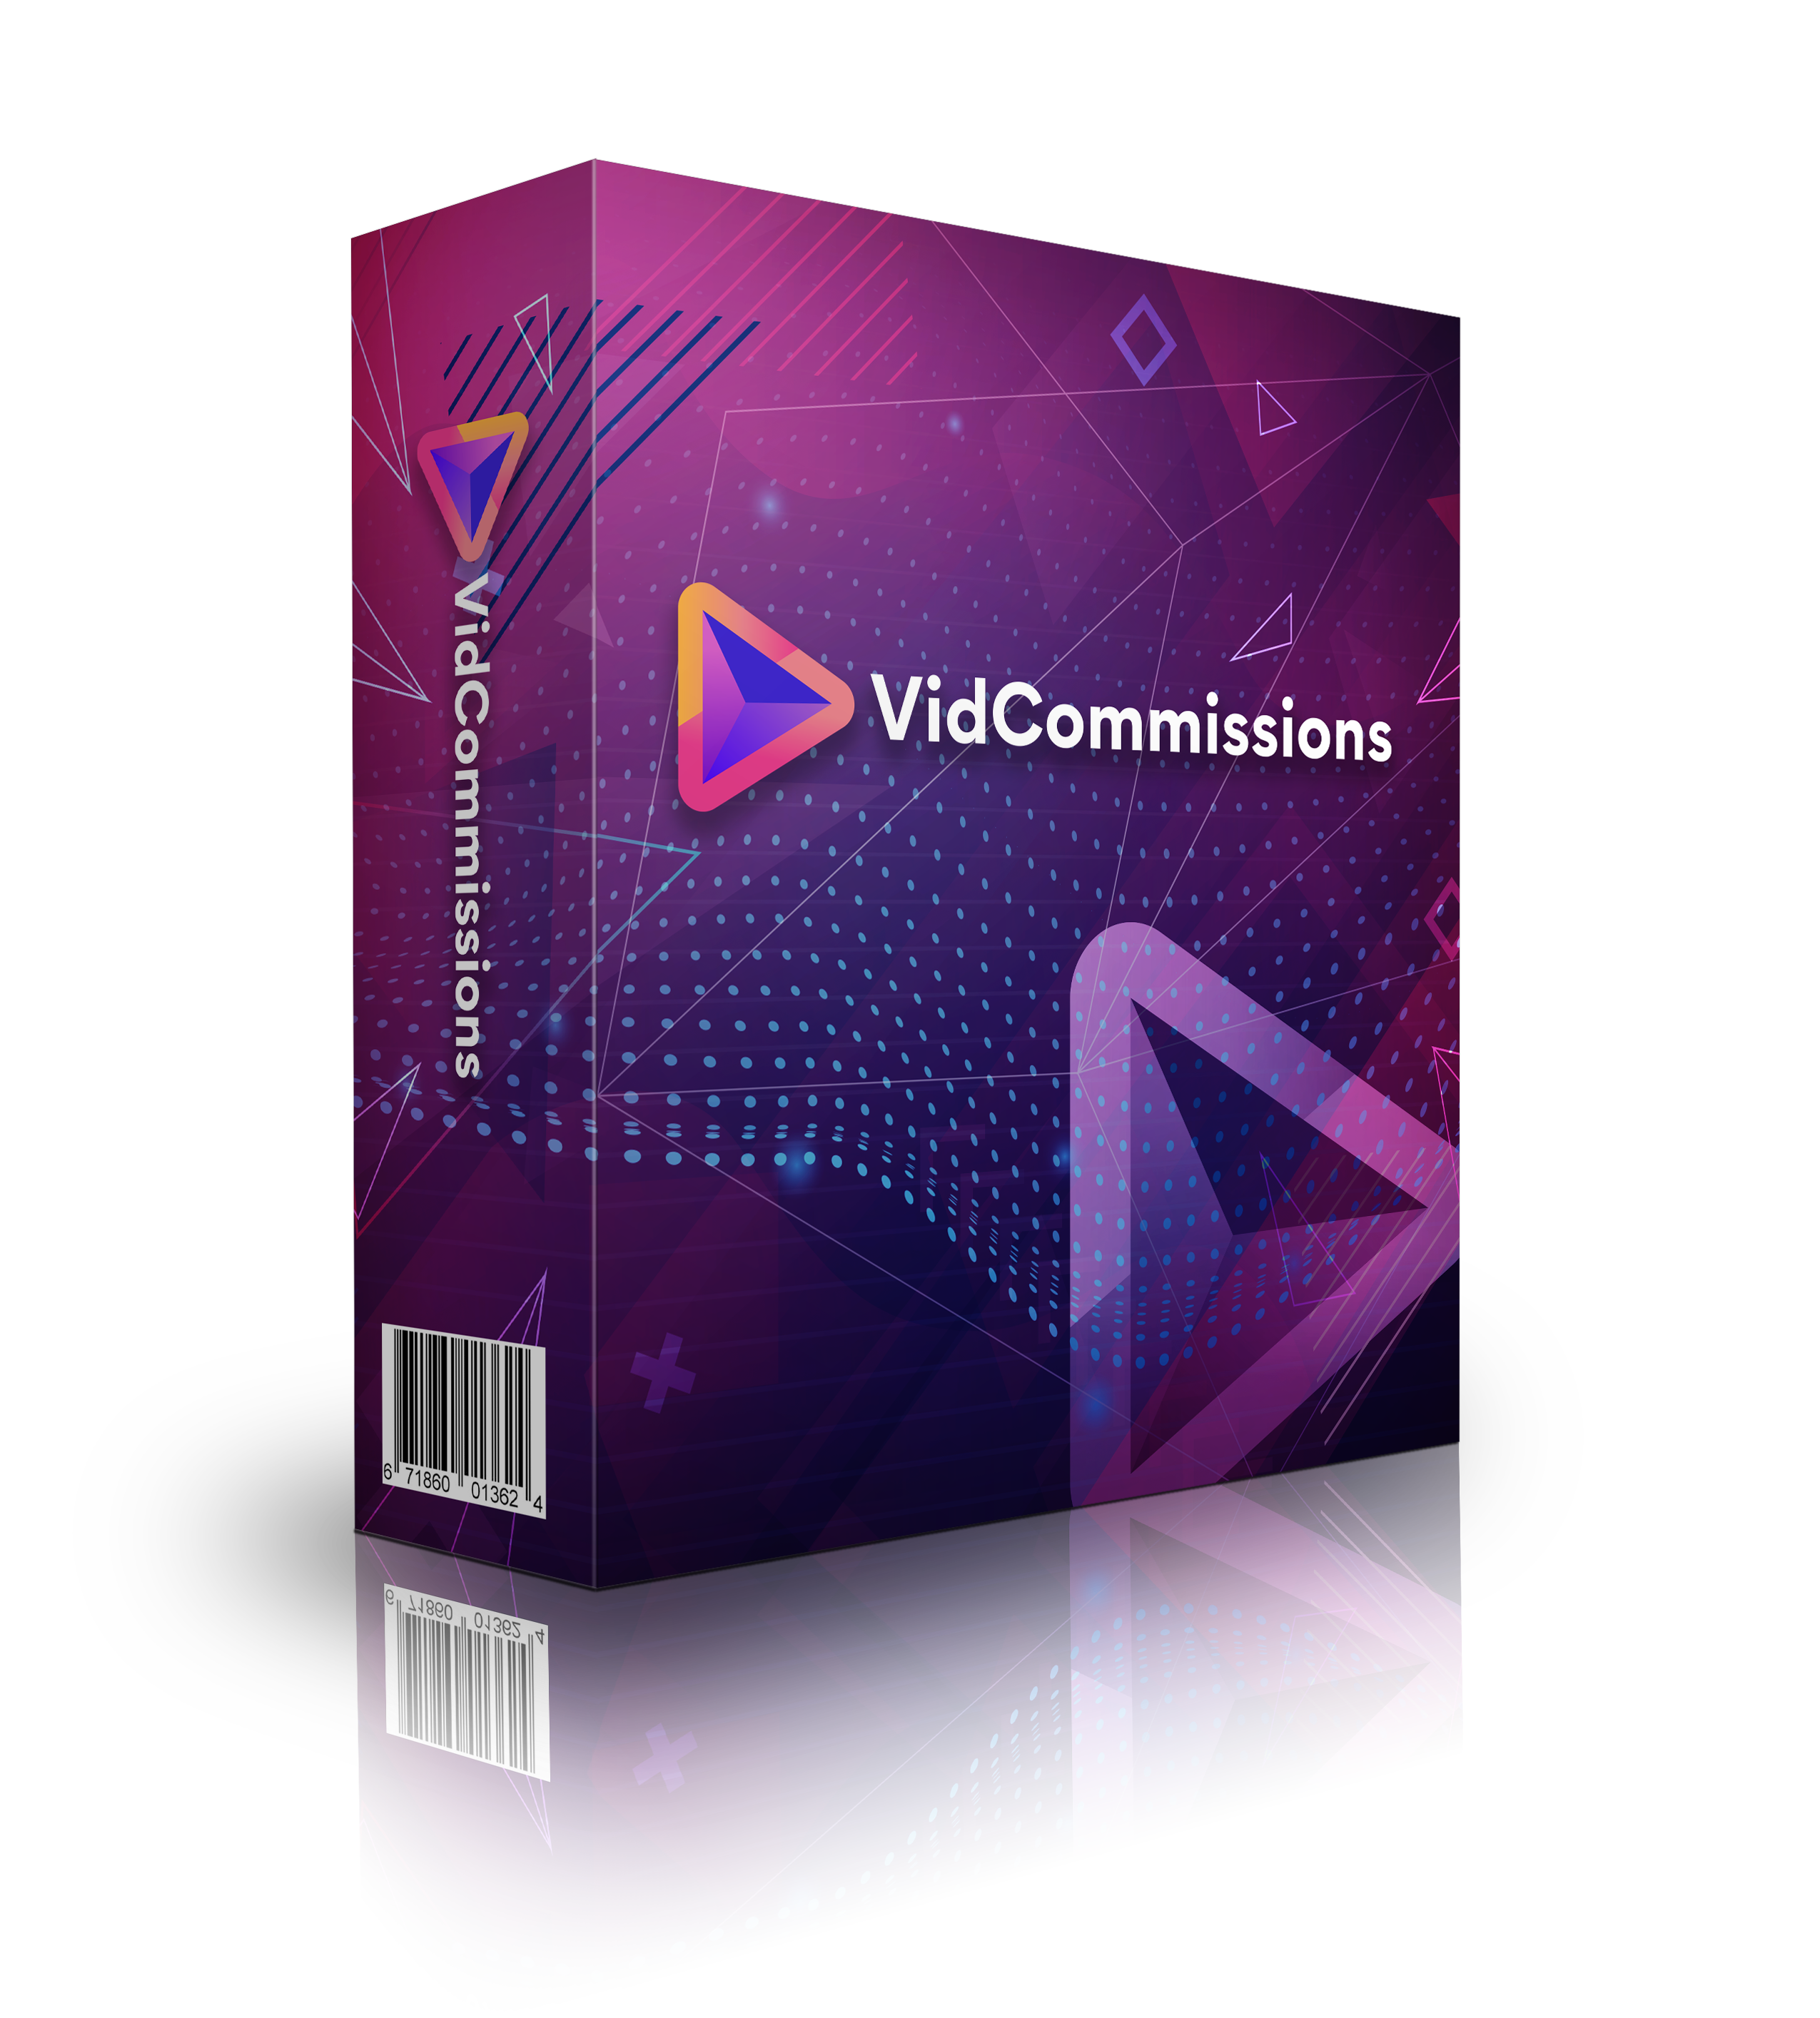 VidCommissions Review